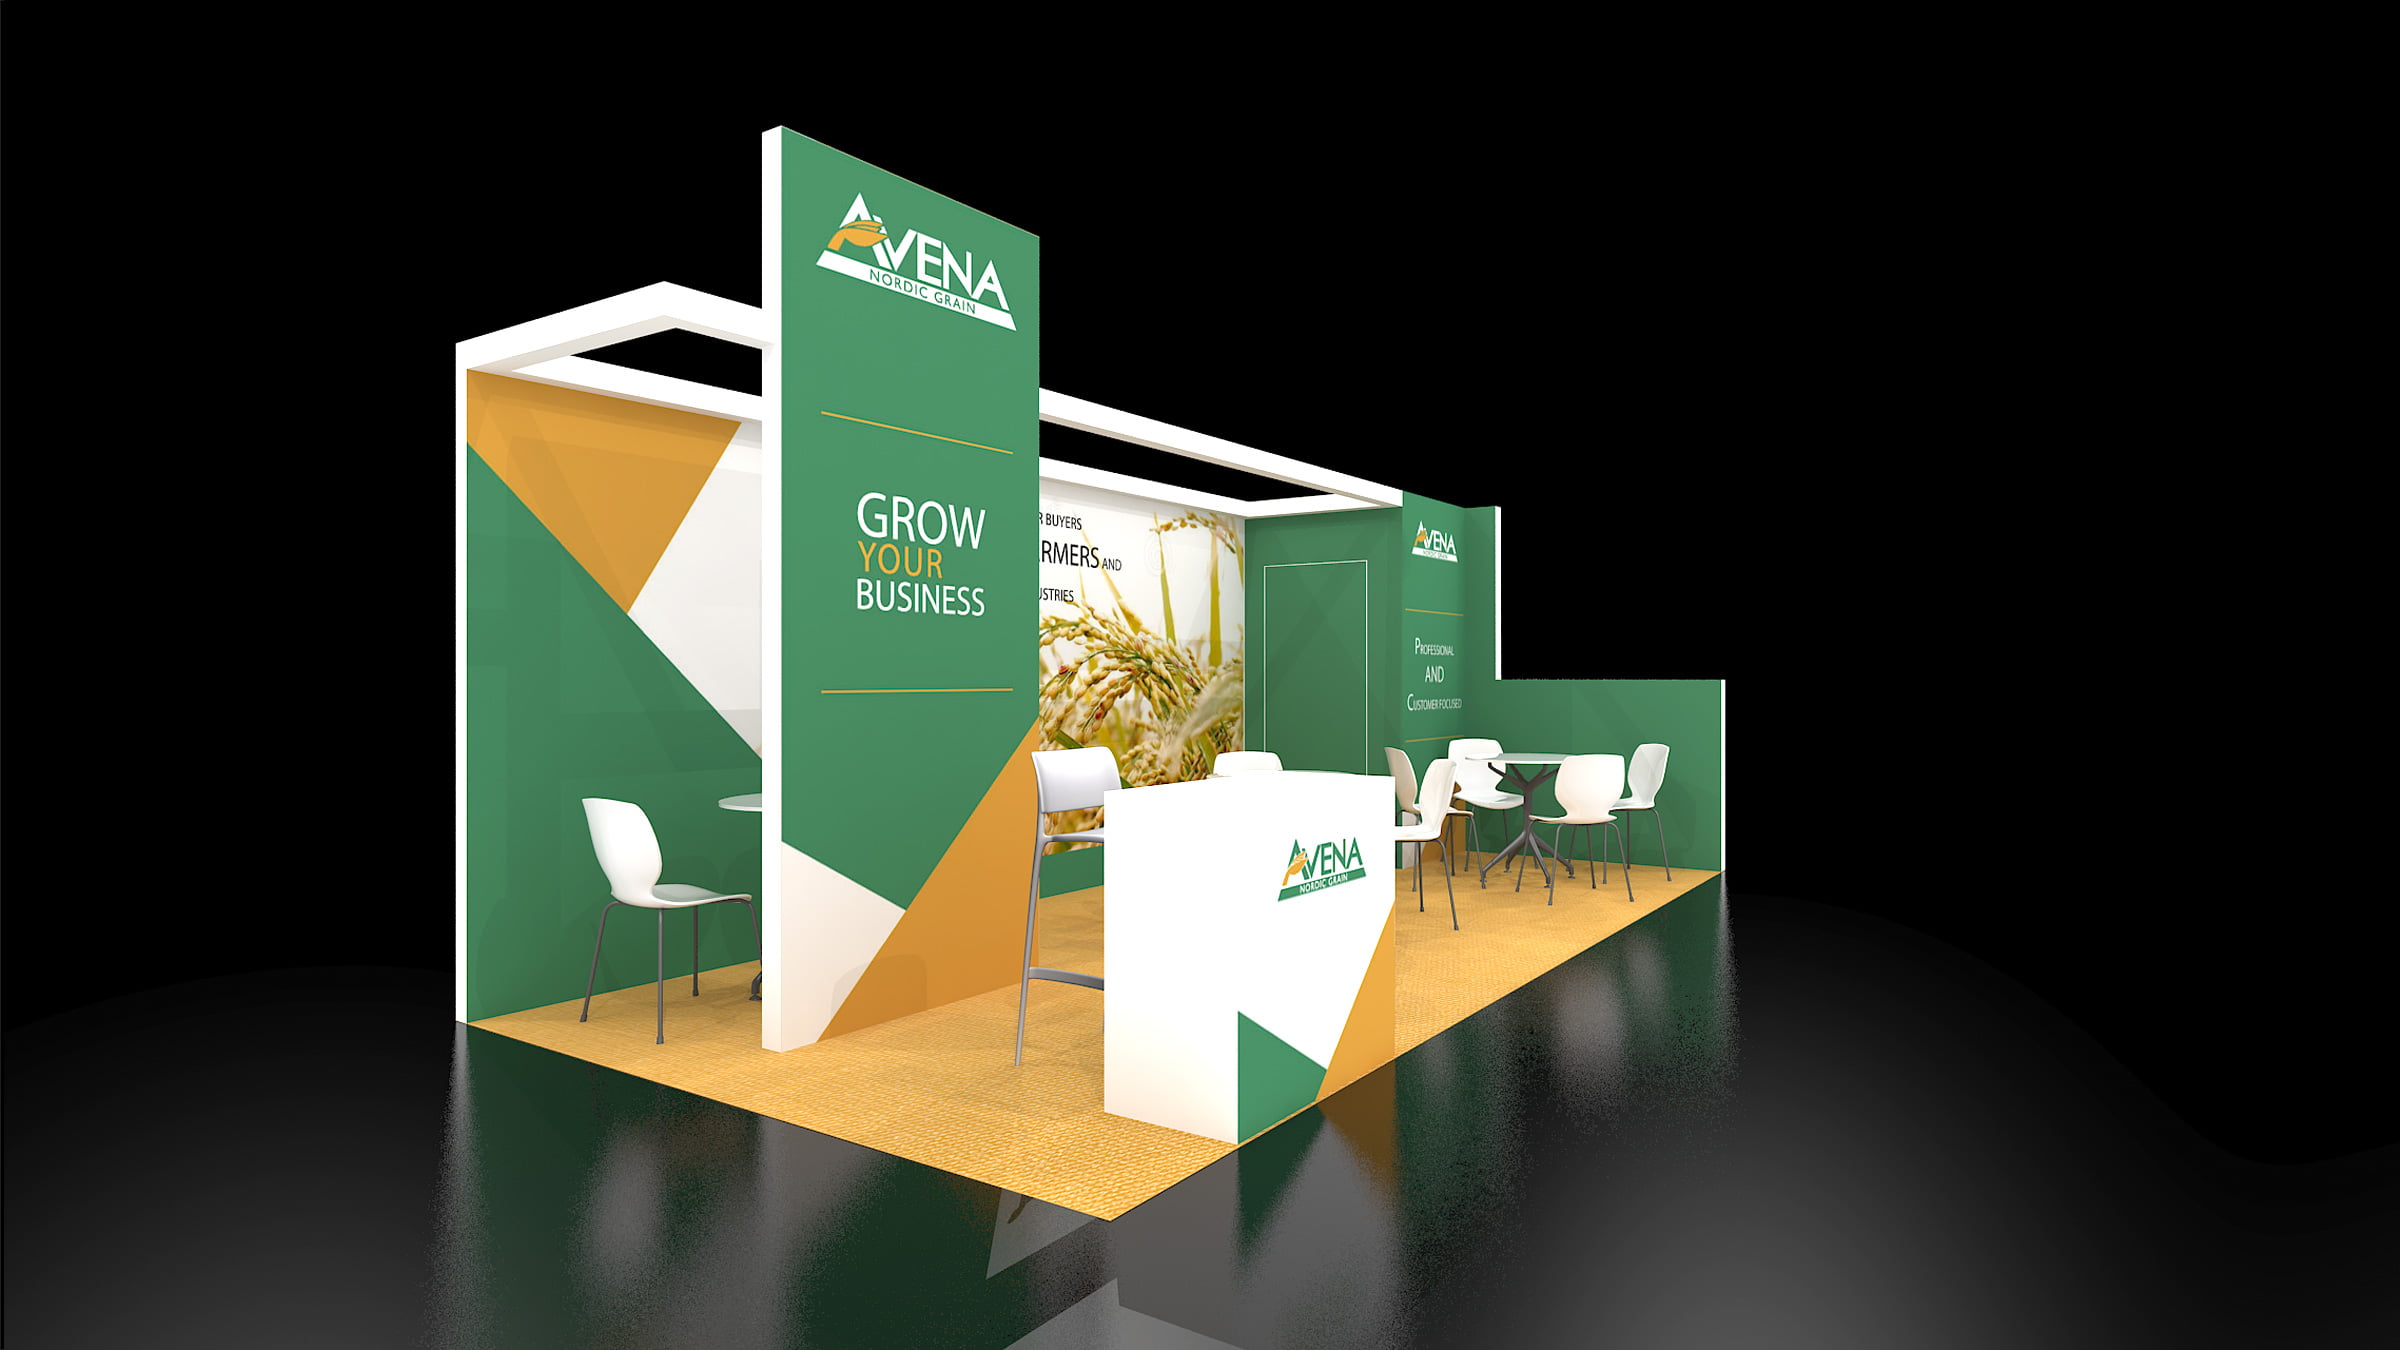 Exhibition boothExhibition booth design, Best trade show booths, Modular Exhibits, Custom Trade Show, Custom Trade Show Booth, Trade Show Booth Design design, Best trade show booths, Modular Exhibits, Custom Trade Show, Custom Trade Show Booth, Trade Show Booth Design